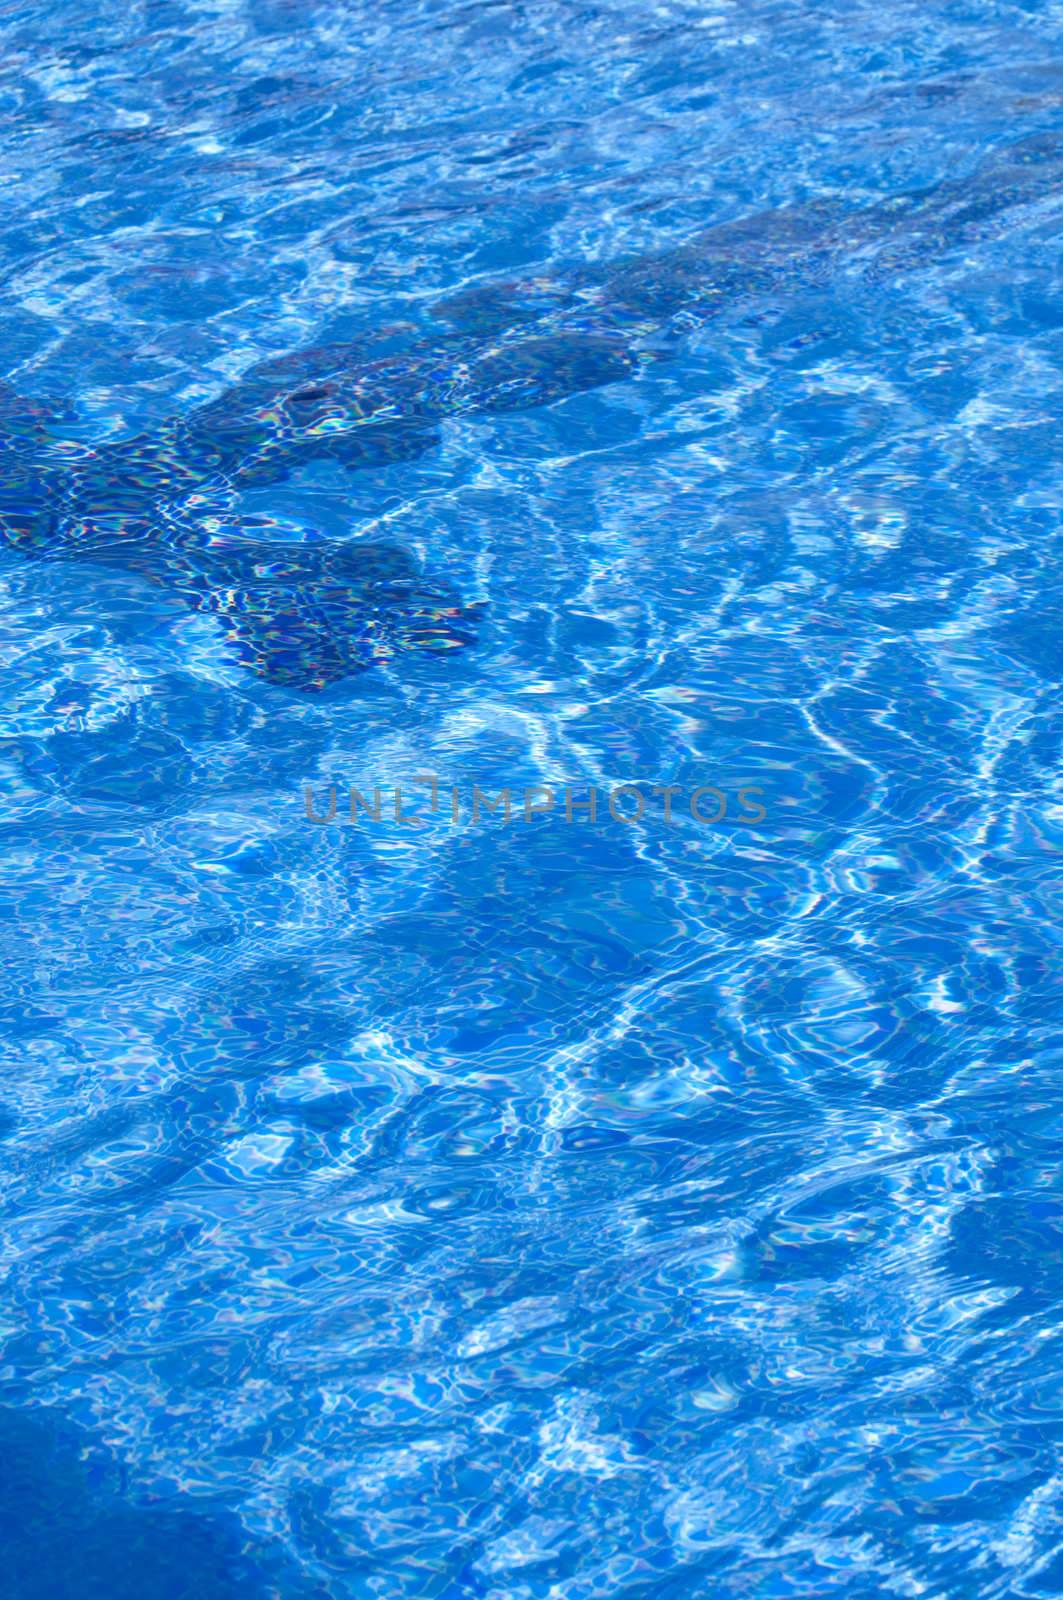 Picture of a swimming pool with details,